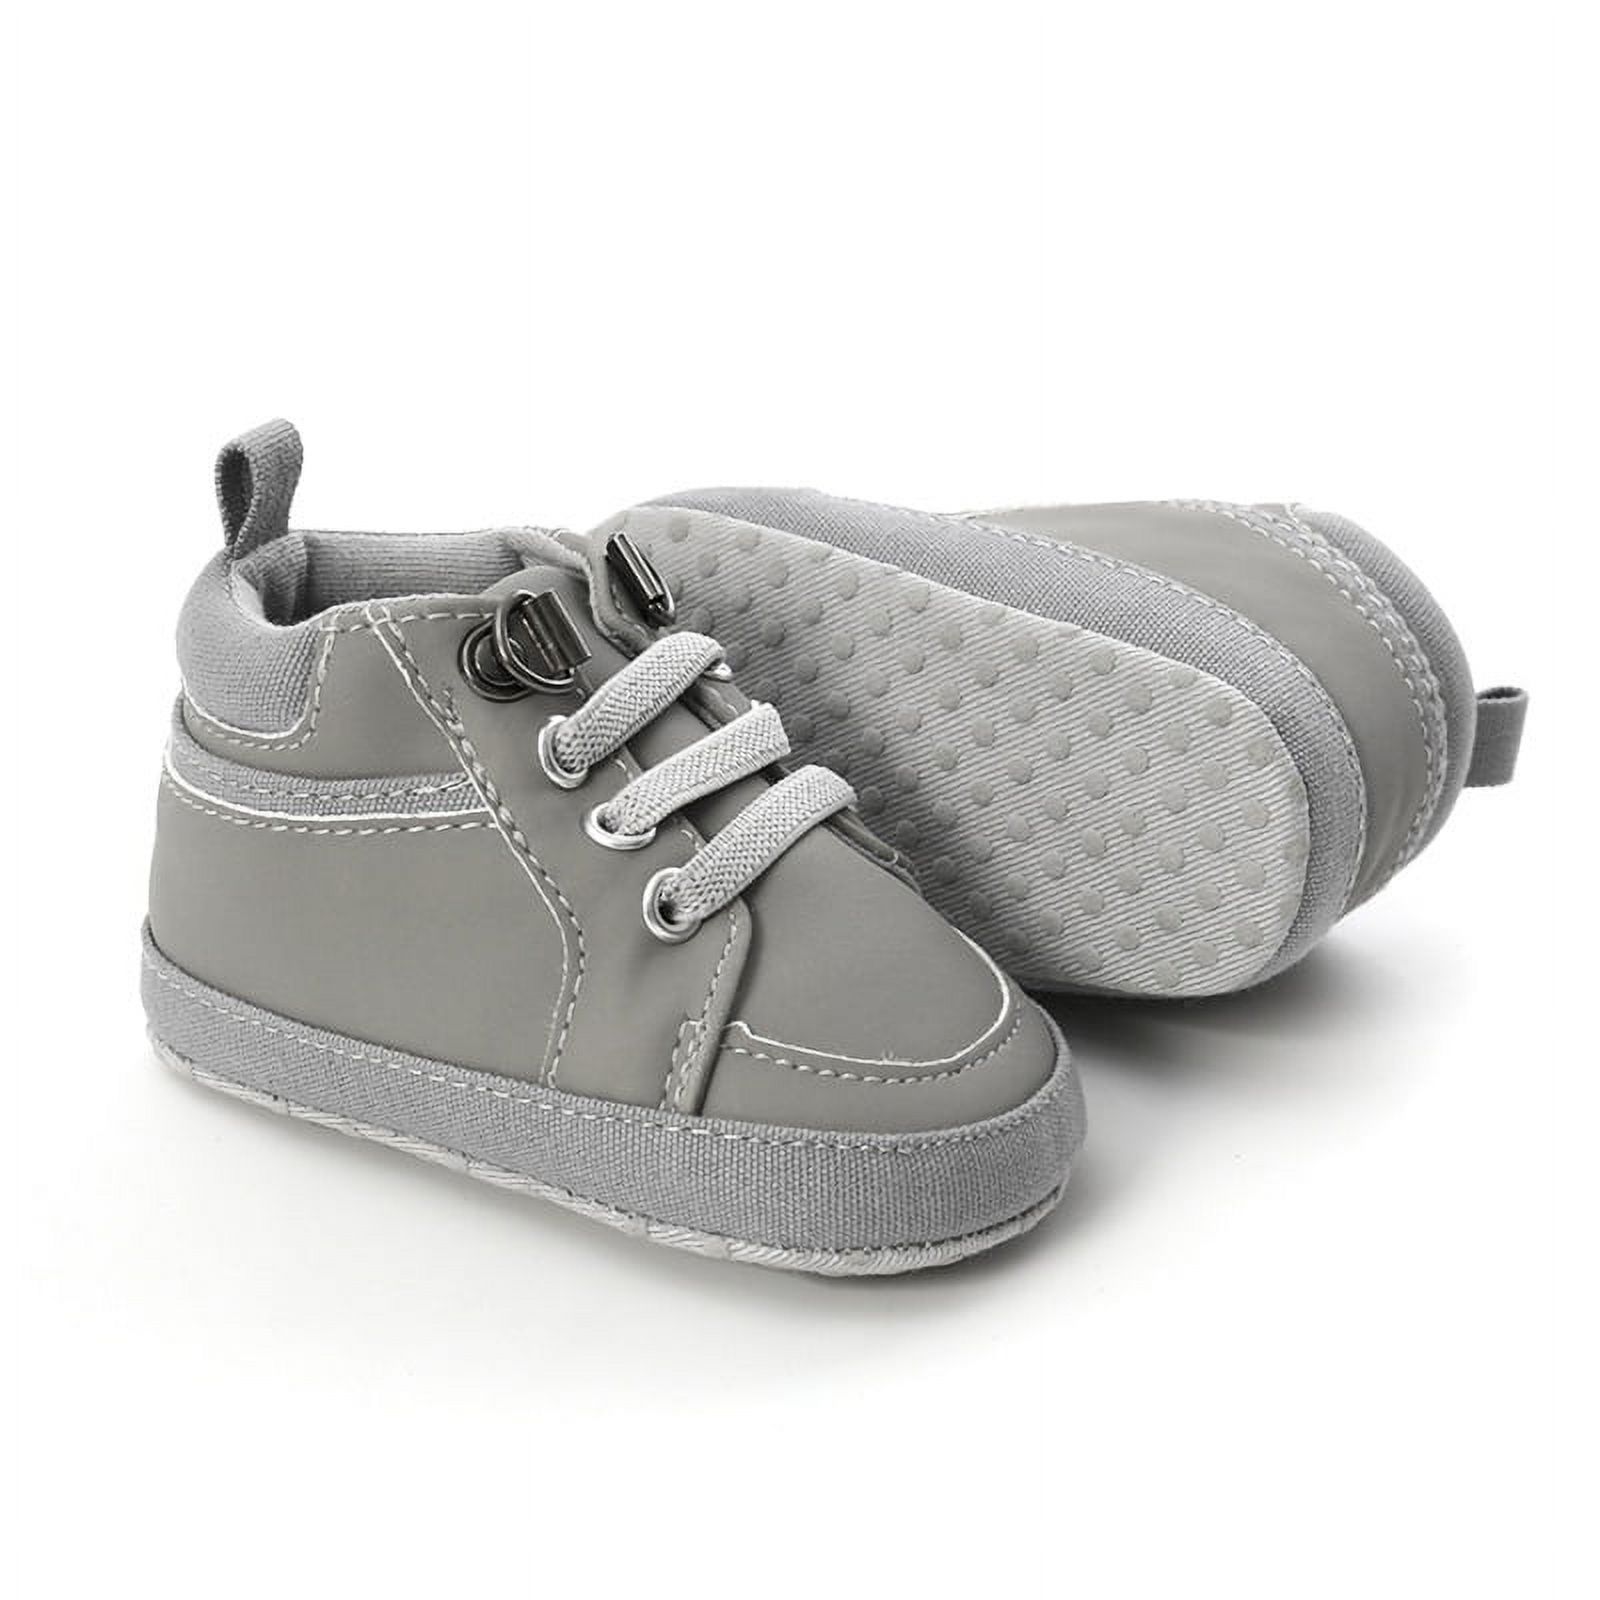 Baby Girls Boys Walking Shoes Toddler Infant First Walker Soft Sole High-Top Ankle Sneakers Newborn Crib Shoe - image 5 of 7